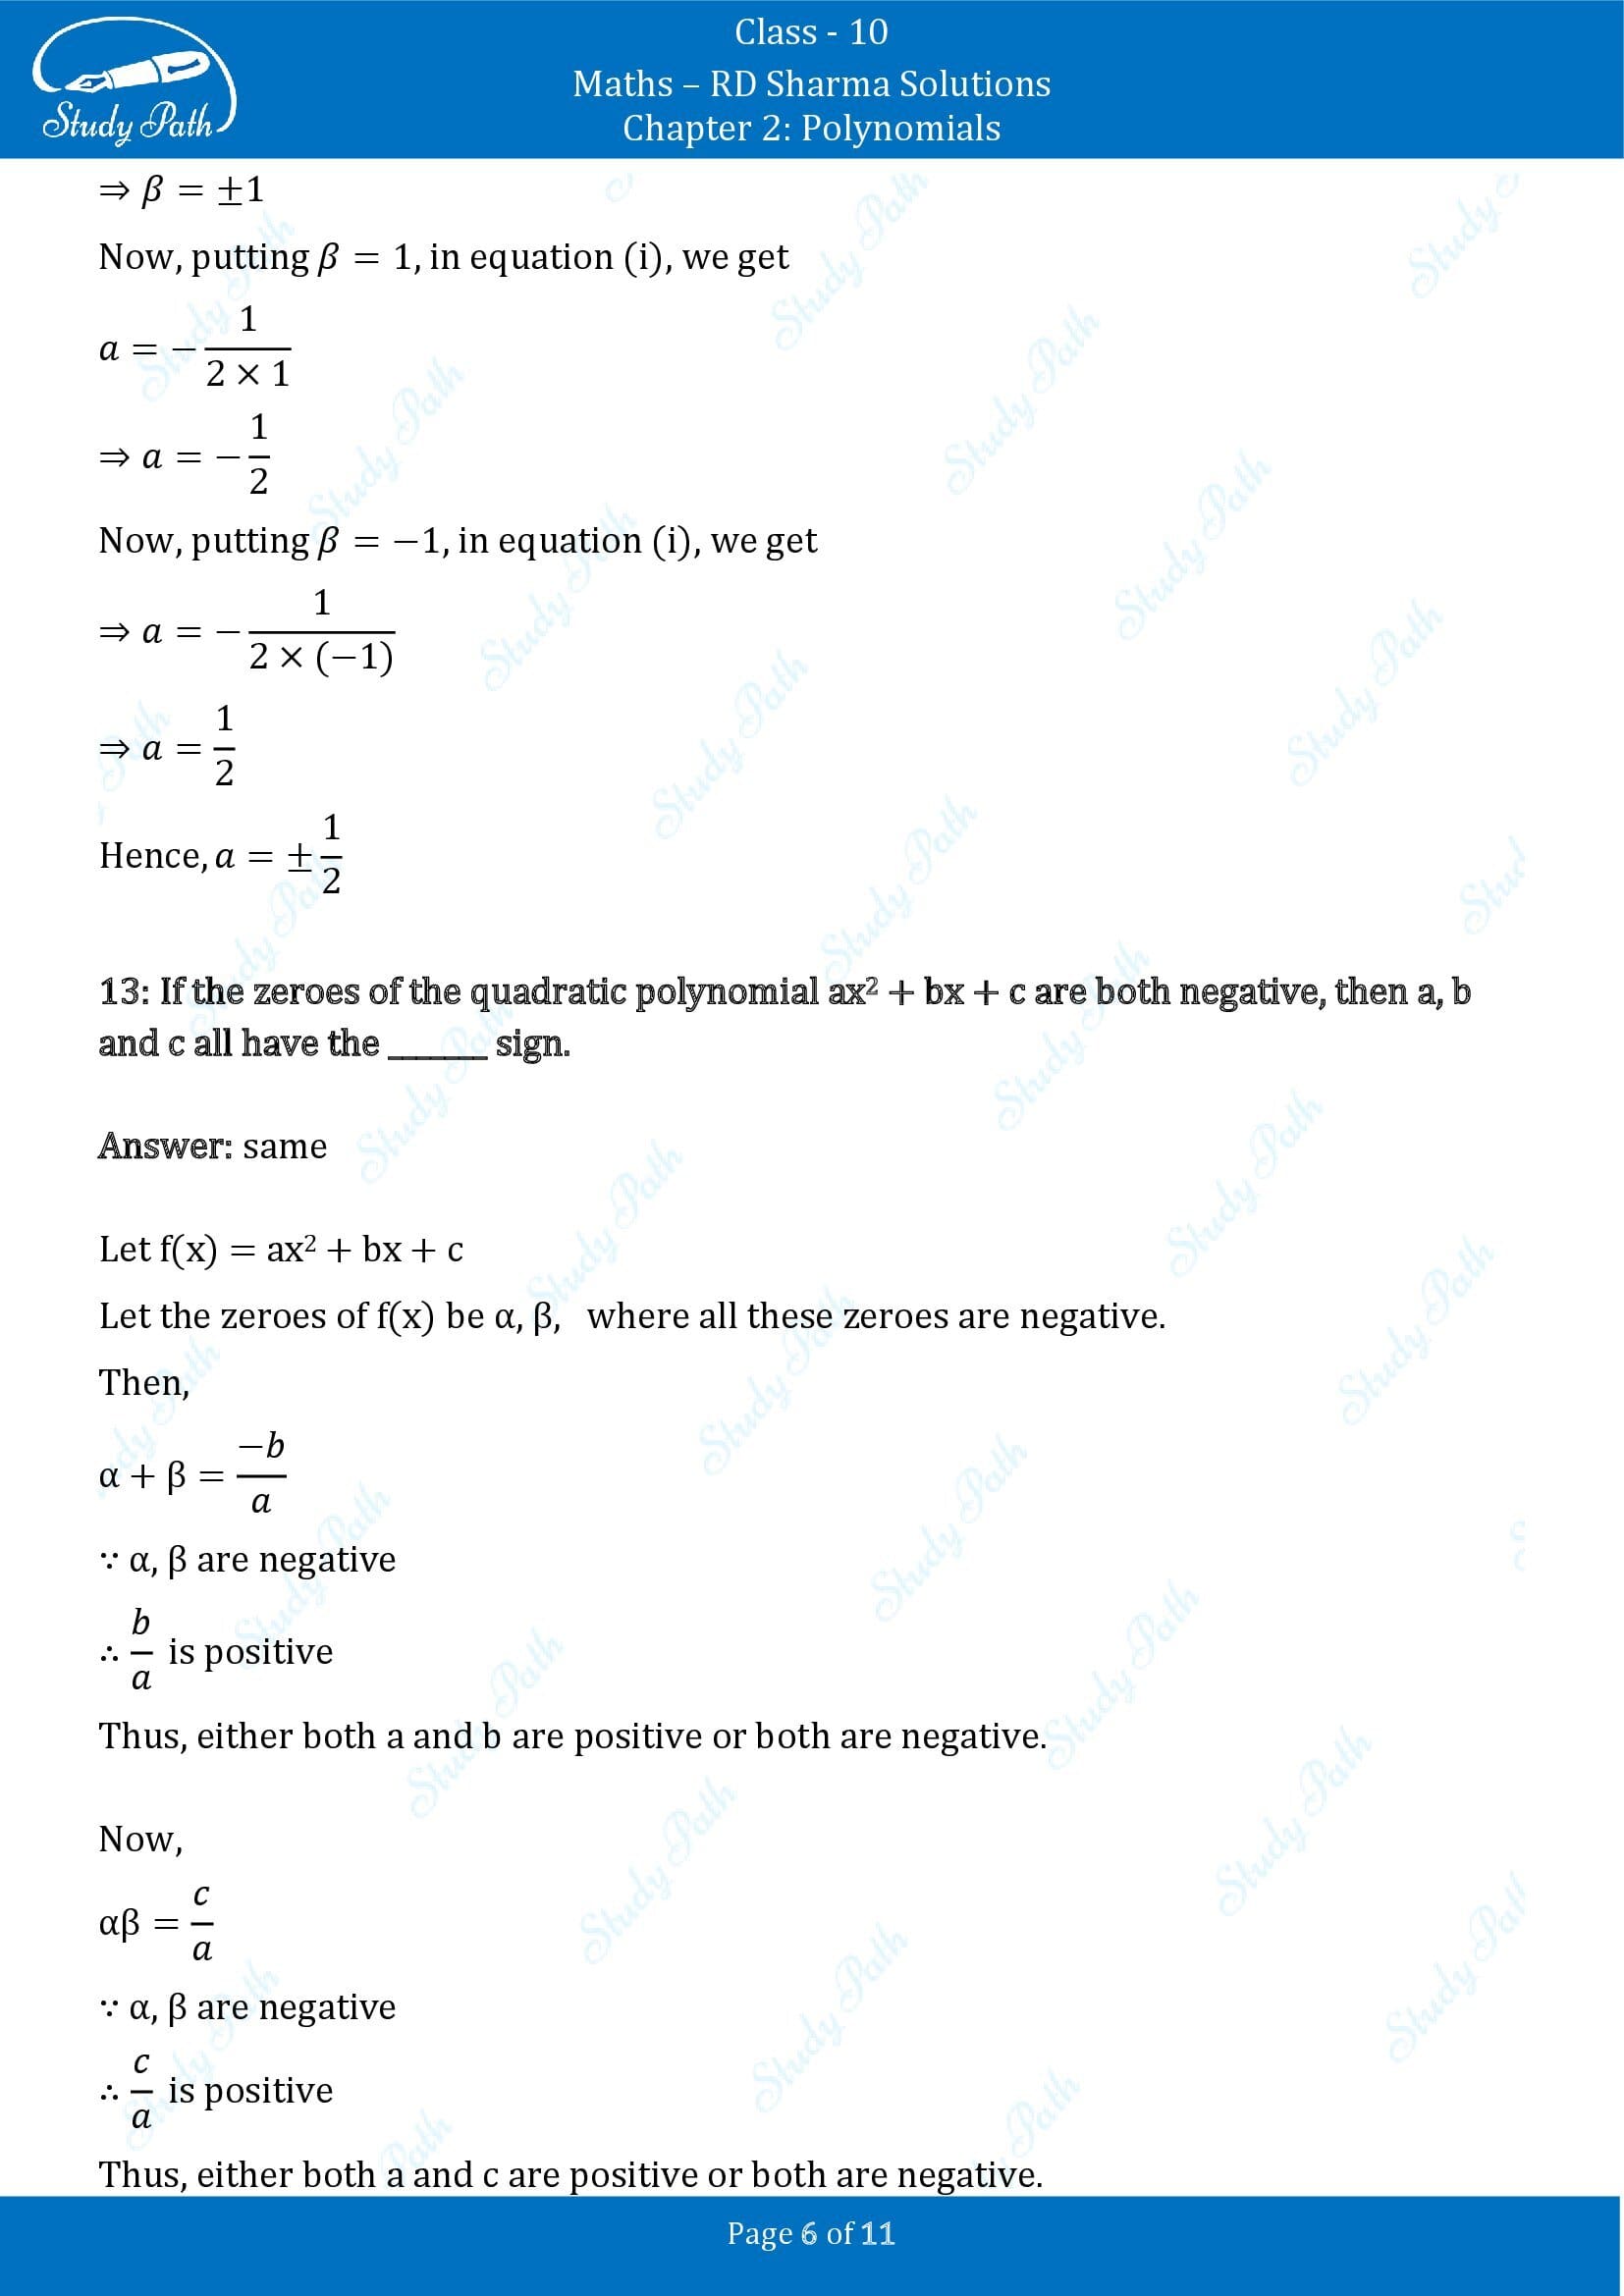 RD Sharma Solutions Class 10 Chapter 2 Polynomials Fill in the Blank Type Questions FBQs 00006